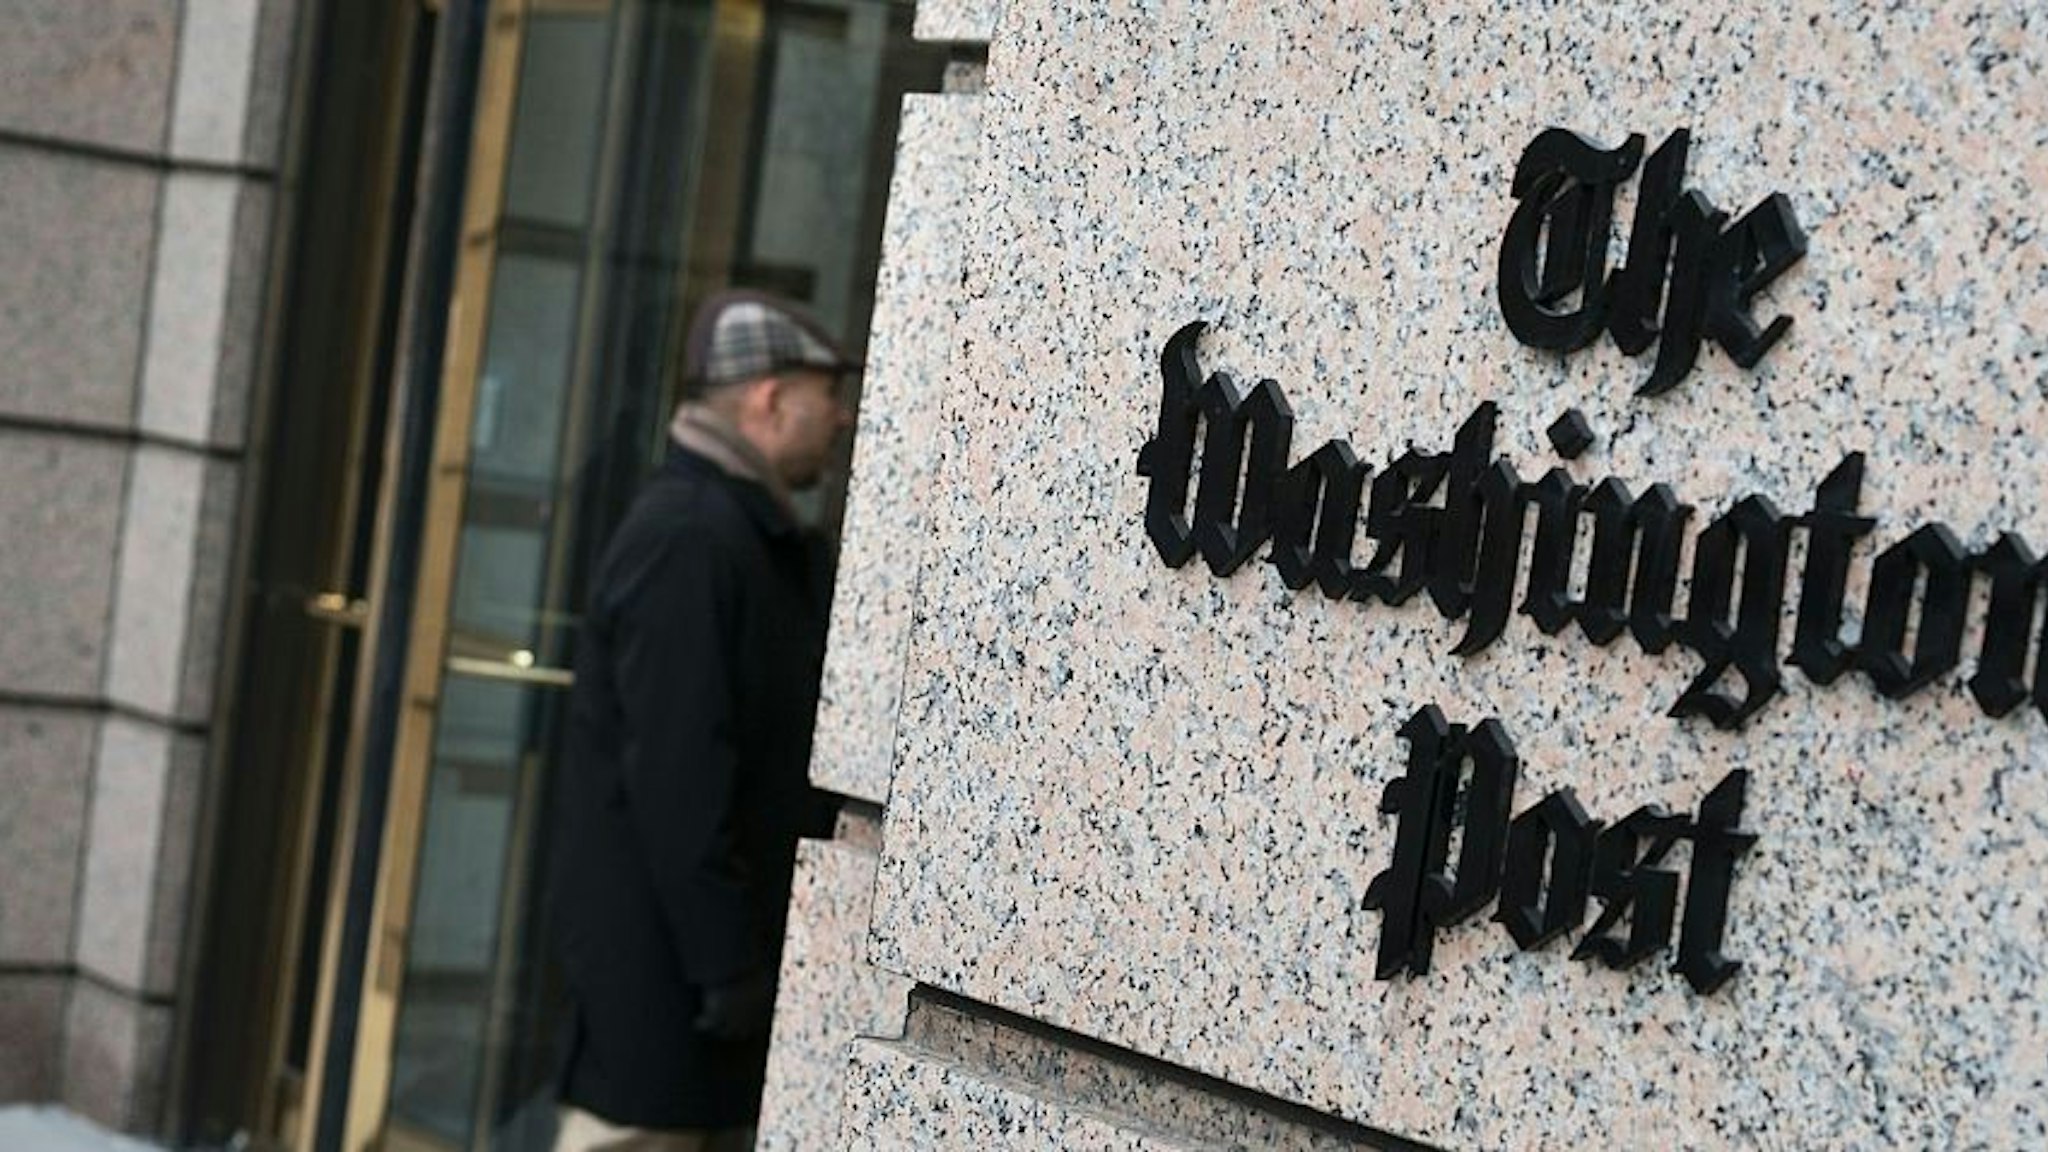 A man walks into the Washington Post's new building March 3, 2016 in Washington, DC. A view of the Washington Post's new building March 3, 2016 in Washington, DC. / AFP / Brendan Smialowski (Photo credit should read BRENDAN SMIALOWSKI/AFP/Getty Images)